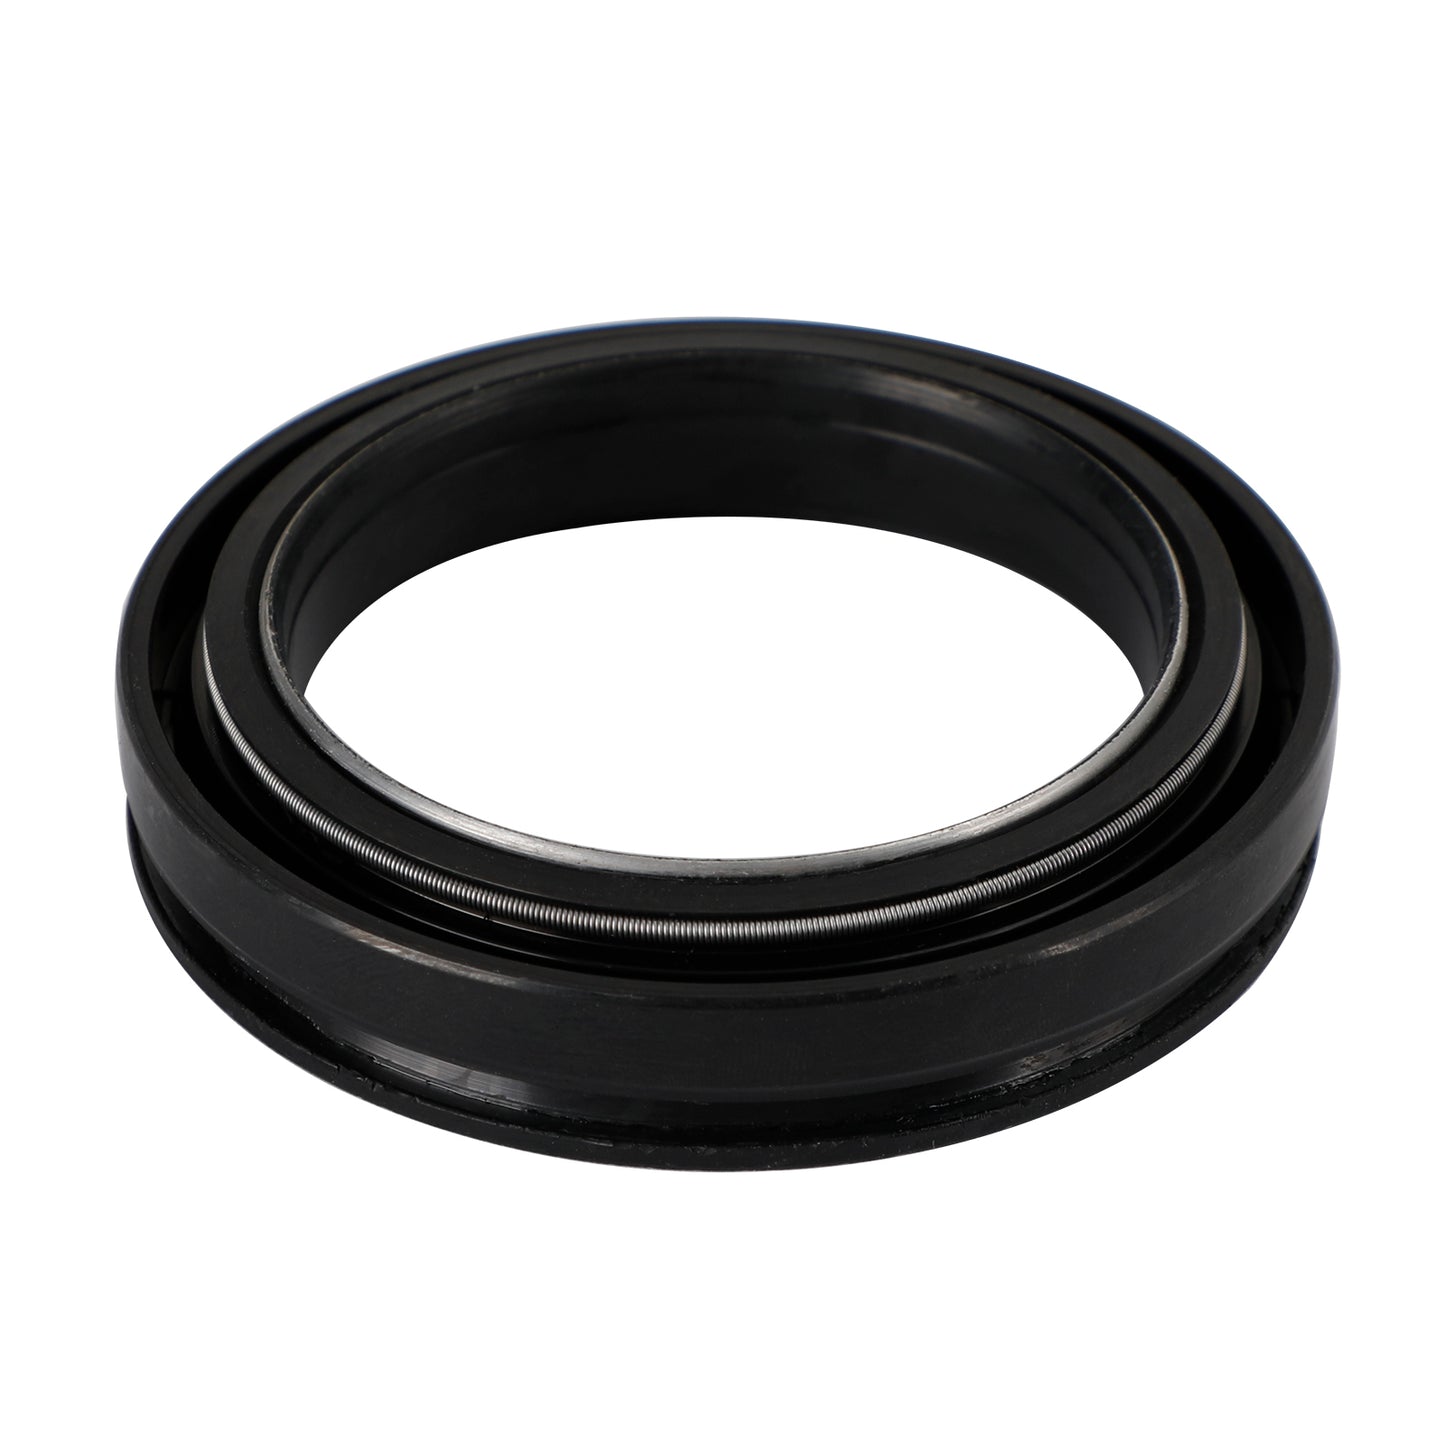 Front Axle Oil Seal 33670-43360 For Kubota Tractor M5040 M5140 M6030 M7040 Generic